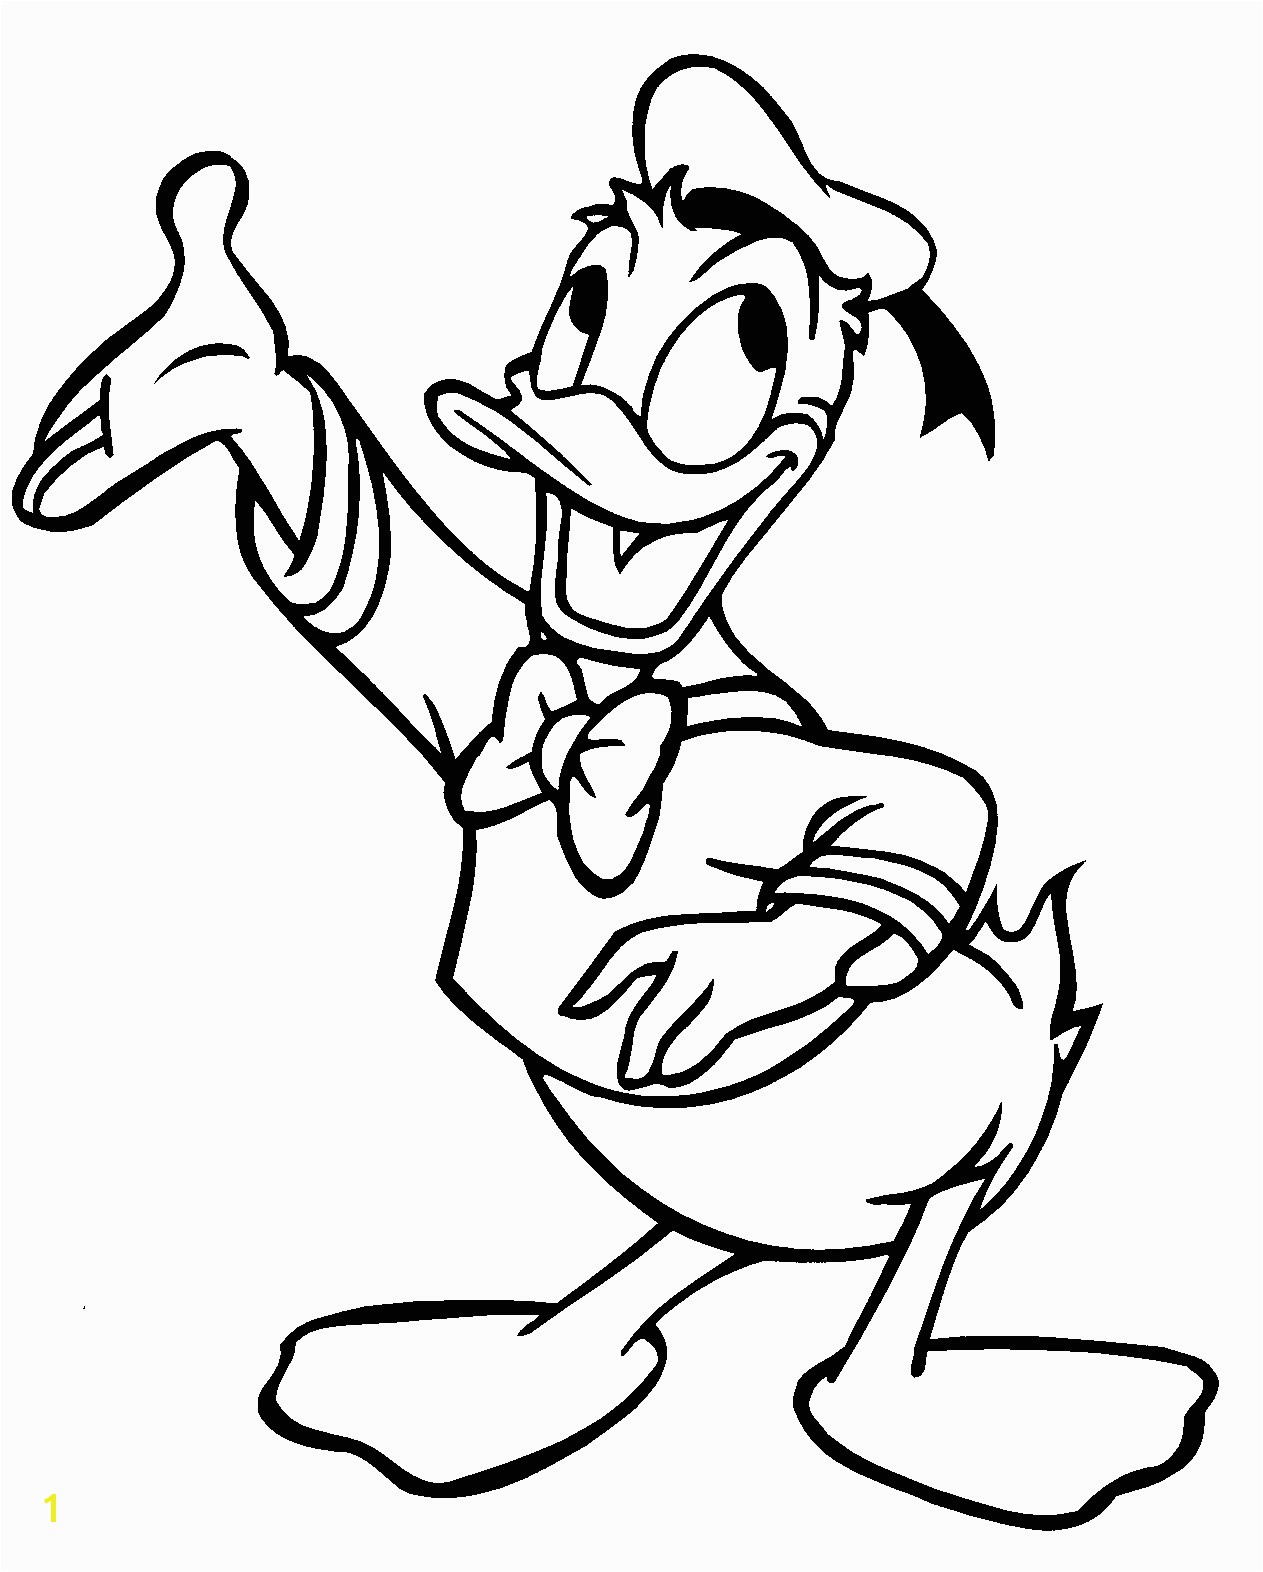 Donald Duck Coloring Pages to Print for Free Duck Coloring Pic New Lifetime Donald Duck Coloring Pages to Print